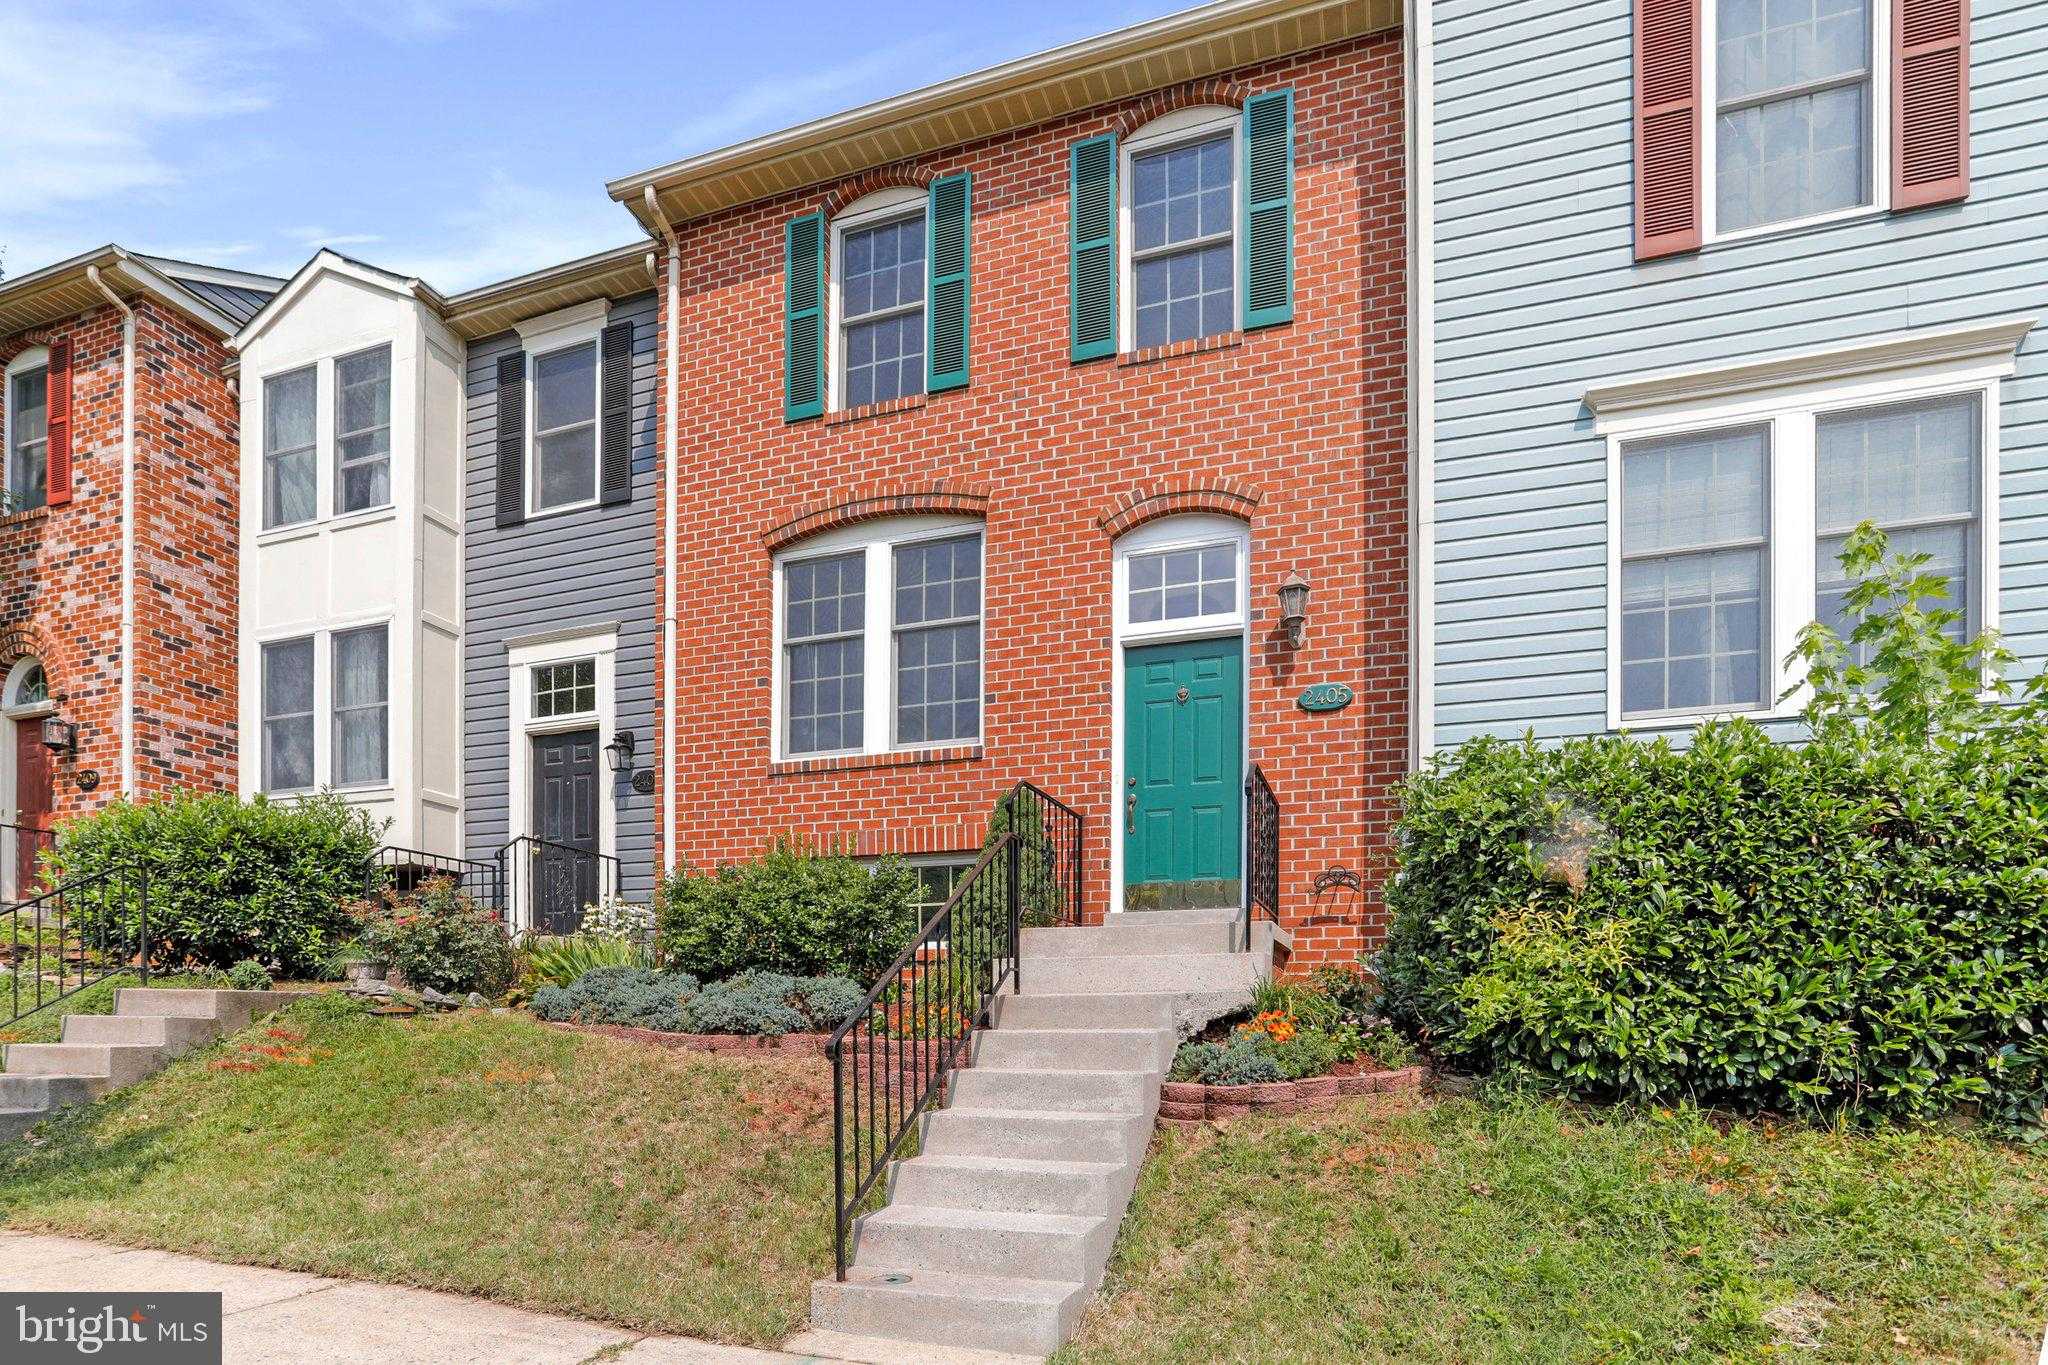 View FREDERICK, MD 21702 townhome